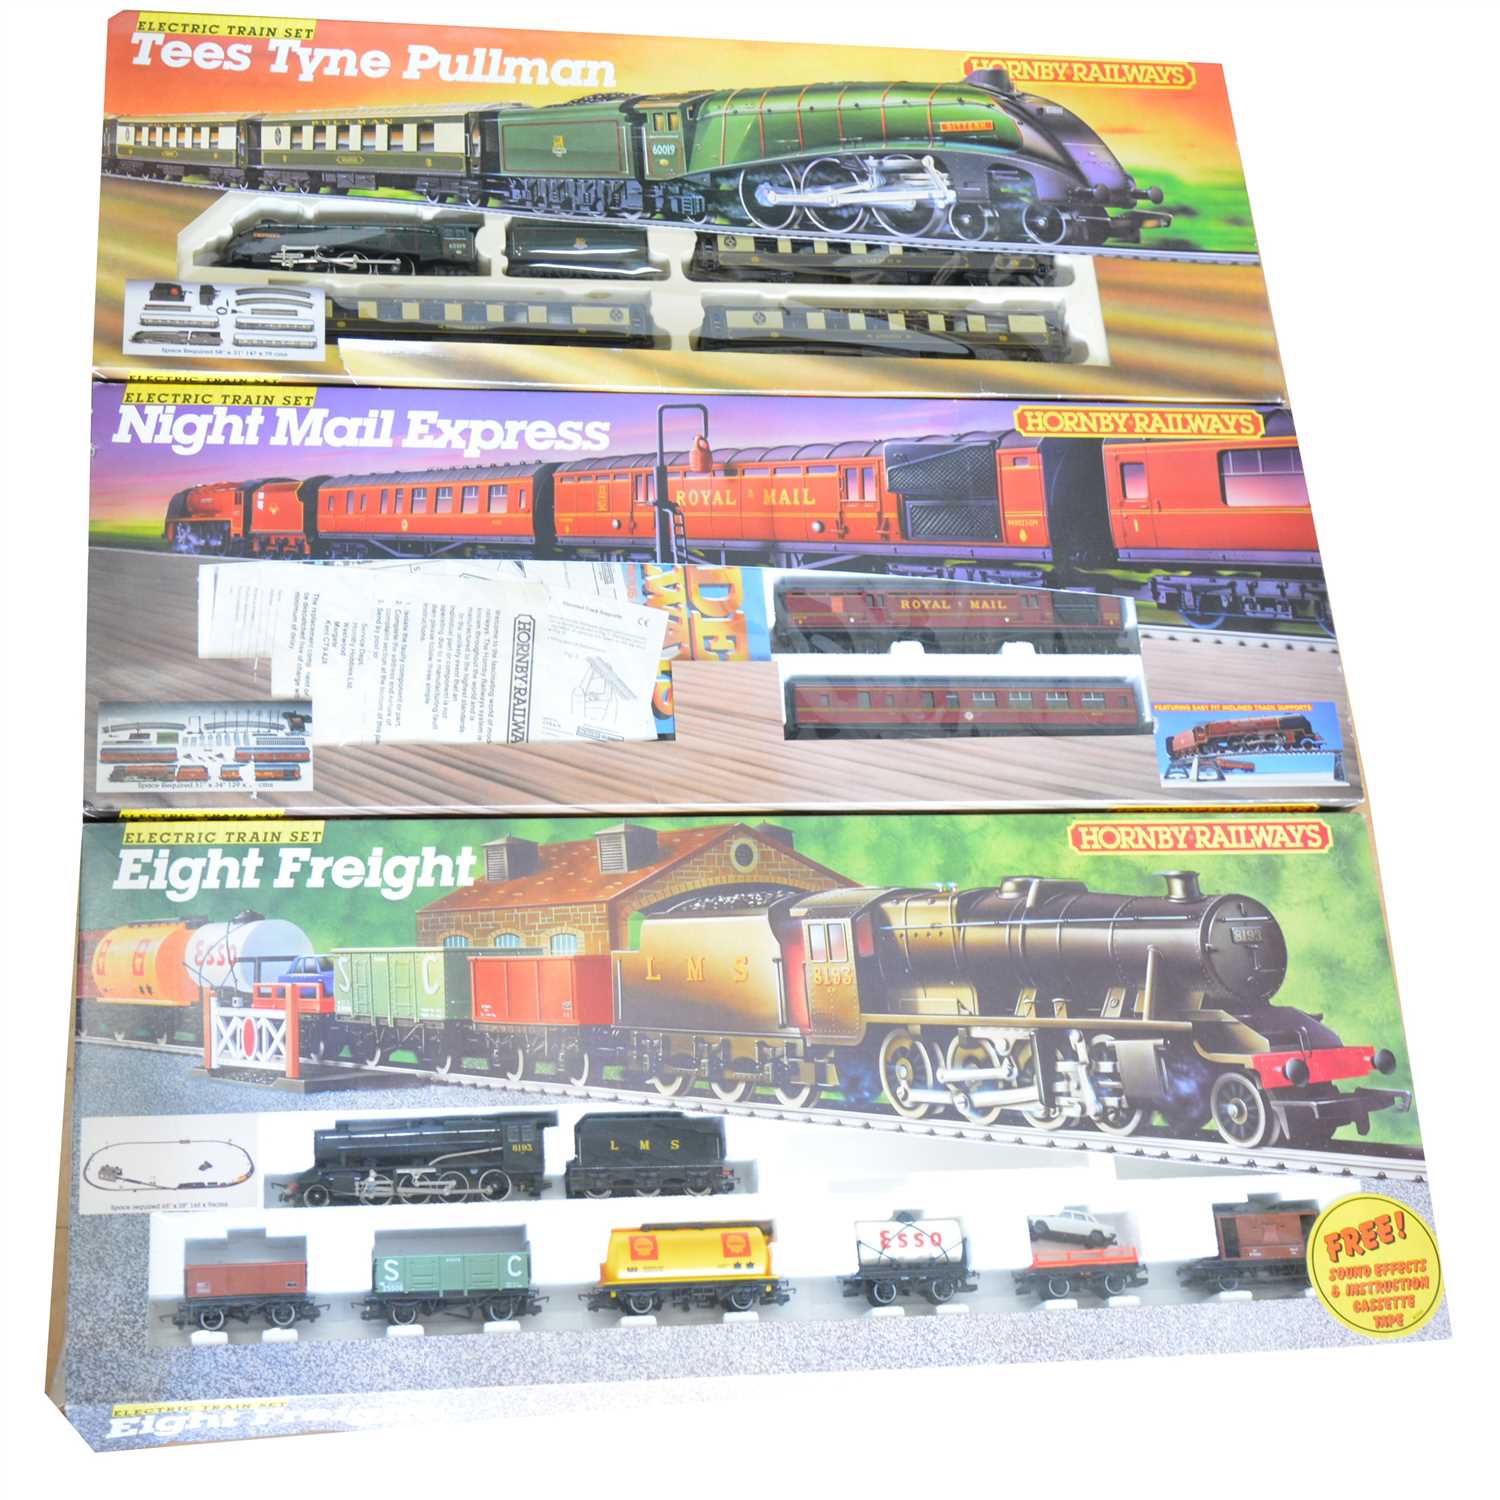 Lot 66 - Hornby OO gauge model railway sets; three including 'Tees Tyne Pullman', 'Night Mail Express' and 'Eight Freight'